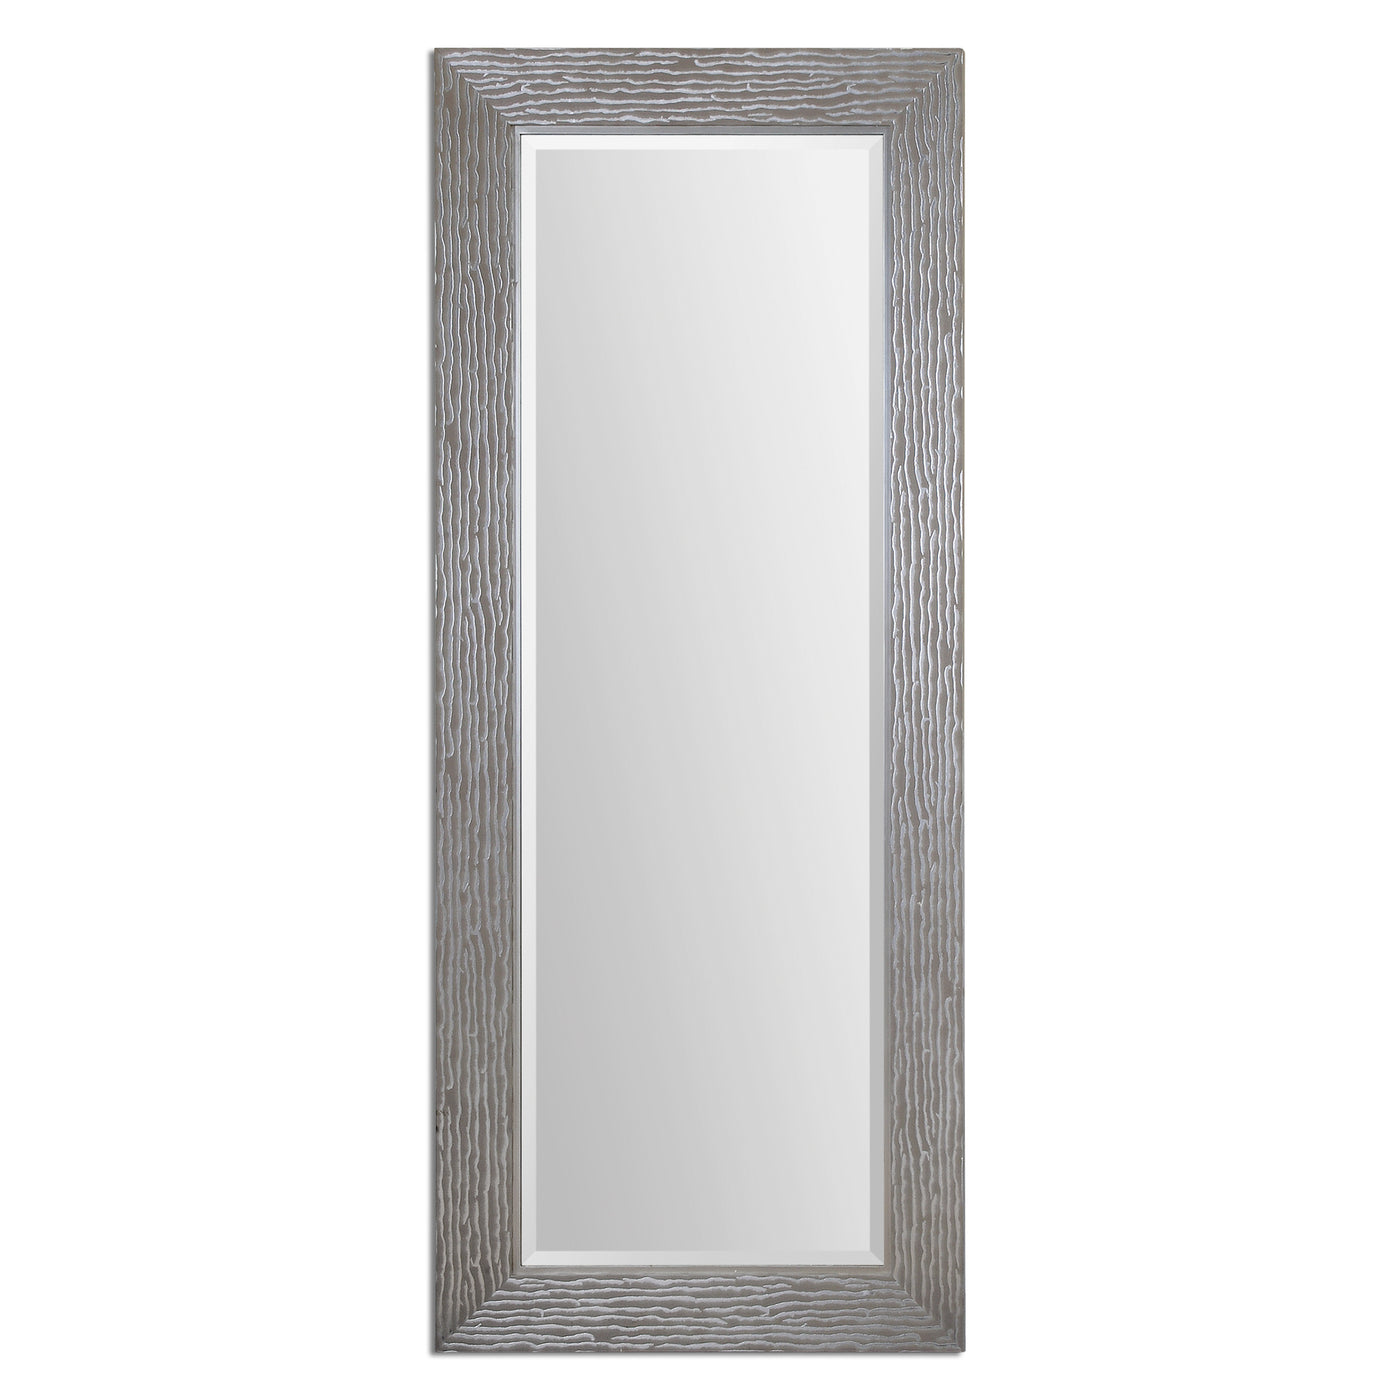 Frame Has A Metallic Silver Finish With A Heavy, Taupe-gray Wash. Mirror Has A Generous 1 1/4" Bevel And May Be Hung Horiz...